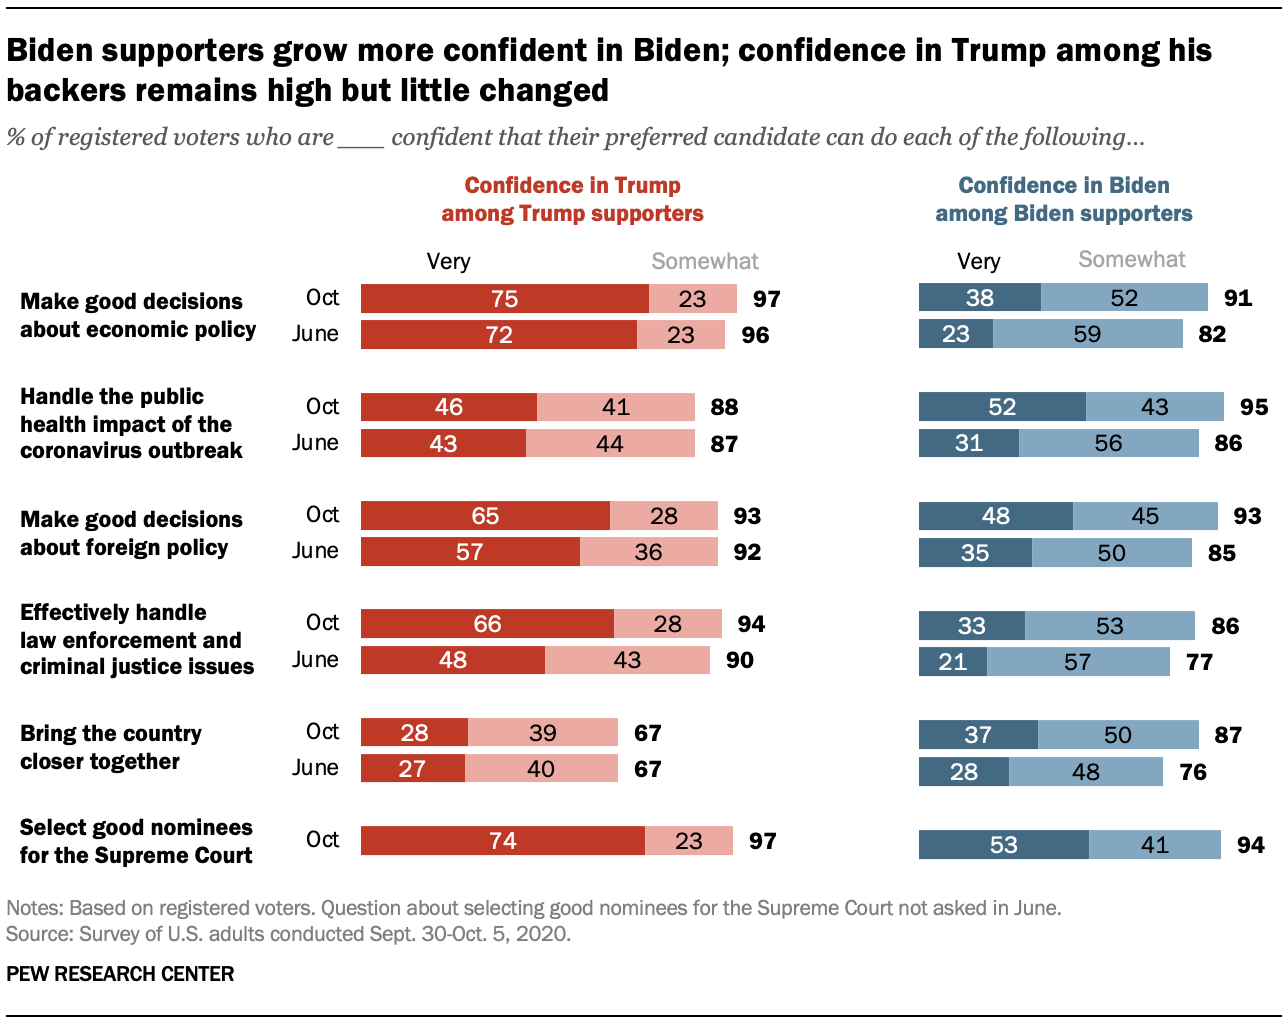 Biden supporters grow more confident in Biden; confidence in Trump among his backers remains high but little changed